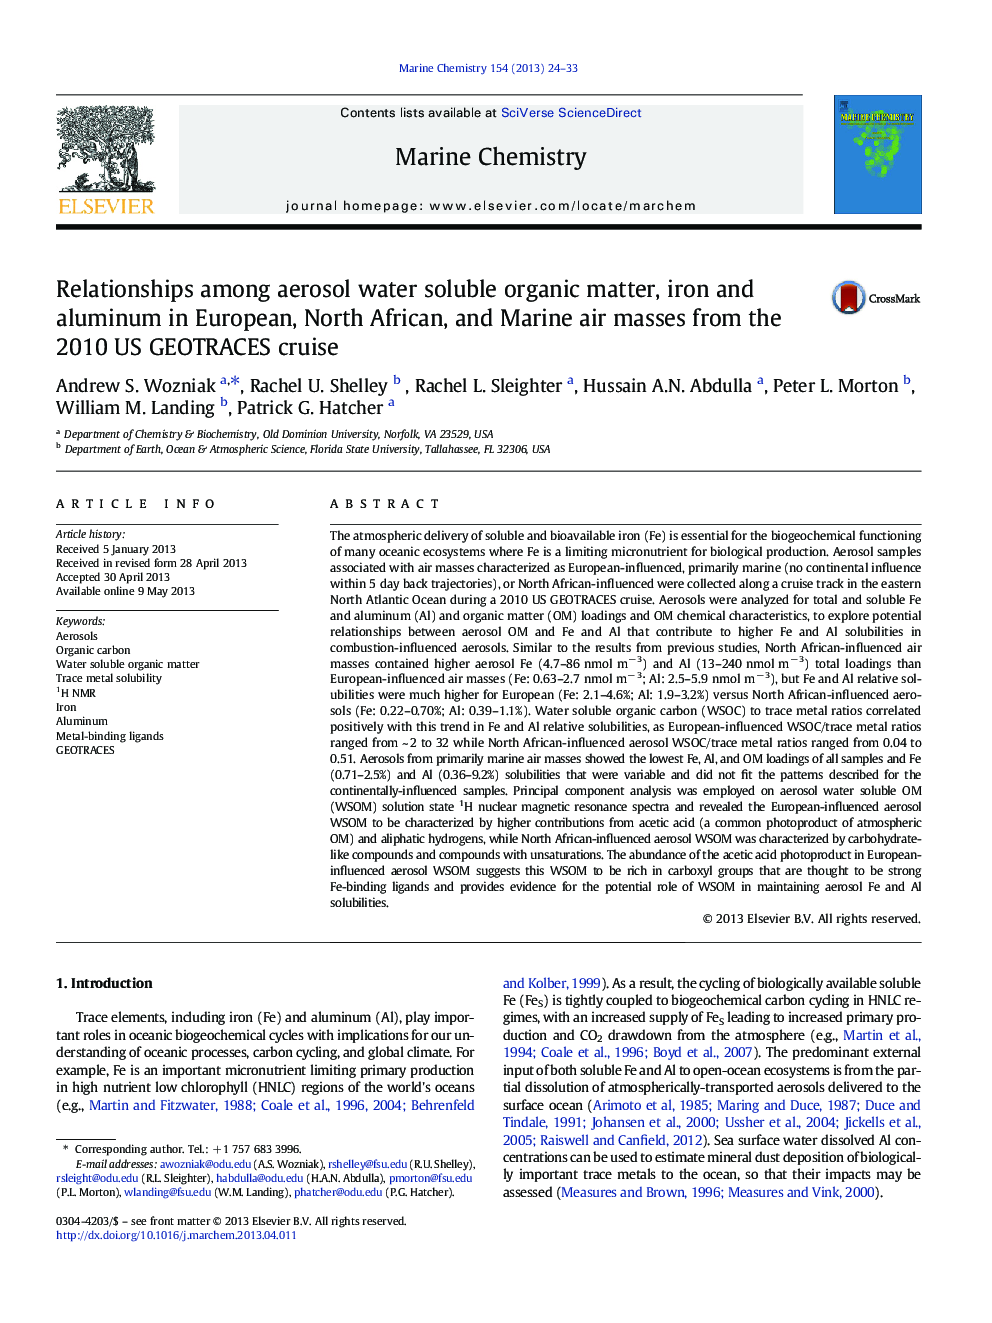 Relationships among aerosol water soluble organic matter, iron and aluminum in European, North African, and Marine air masses from the 2010 US GEOTRACES cruise